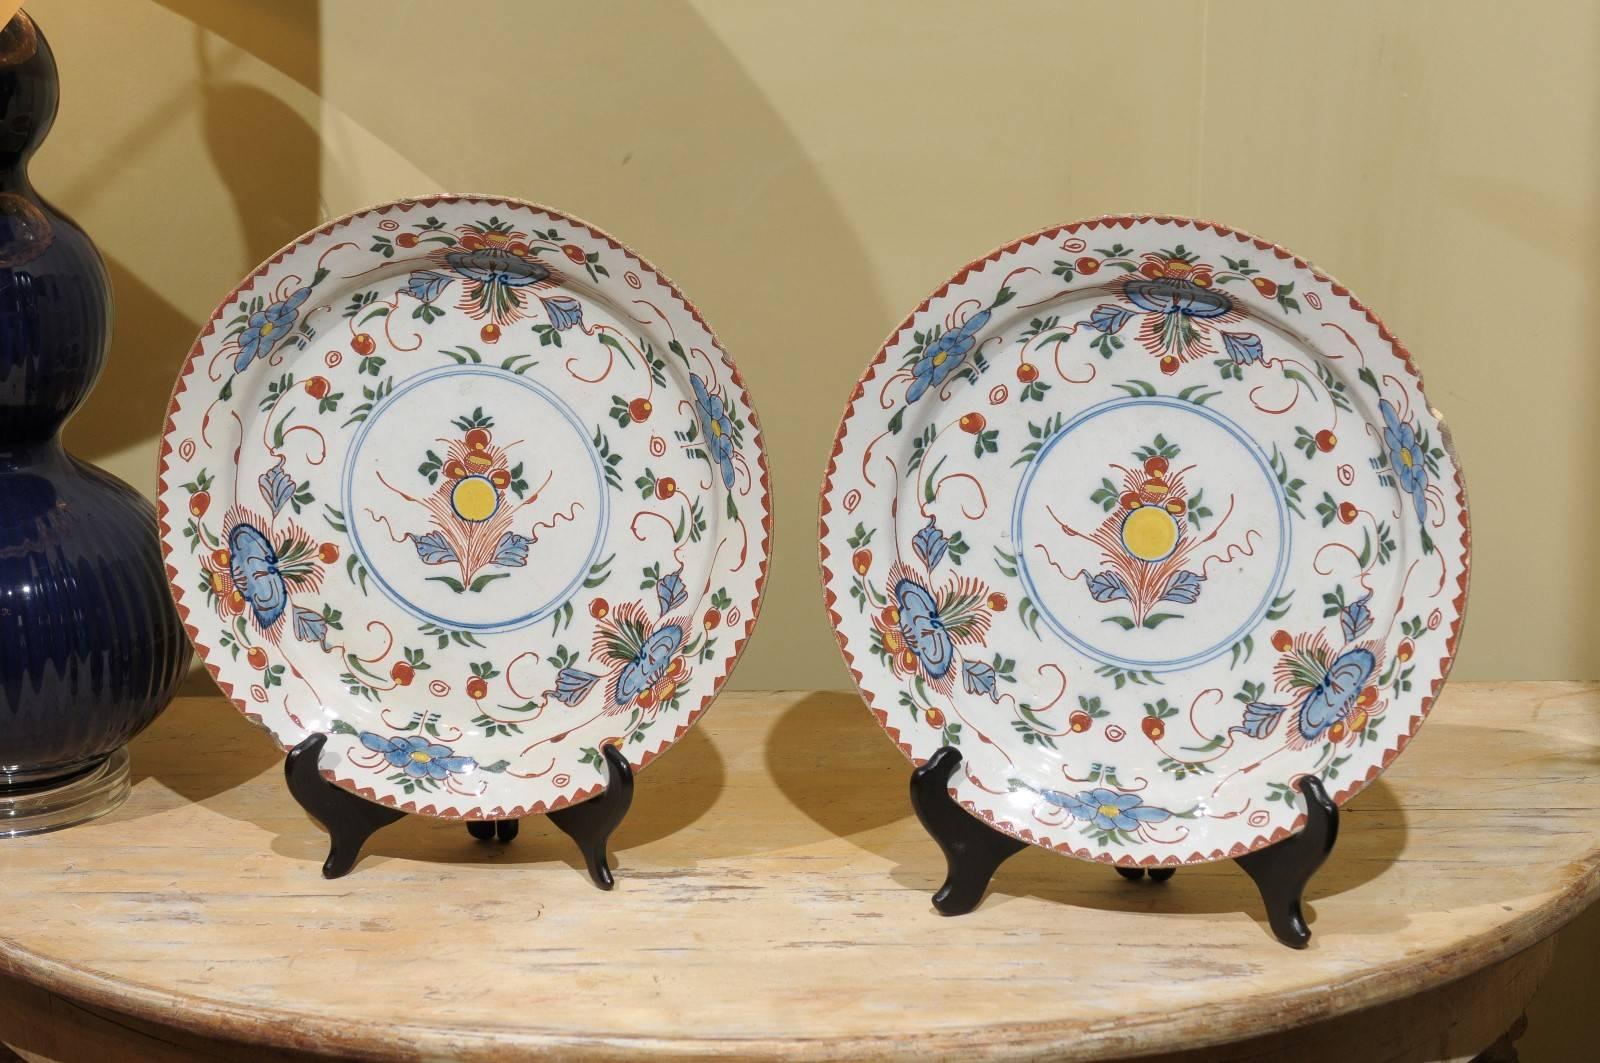 A very unusual pair of polychrome delft chargers. I love the terra cotta with the yellow and blue color pattern this artist has created. There is whimsy on display.